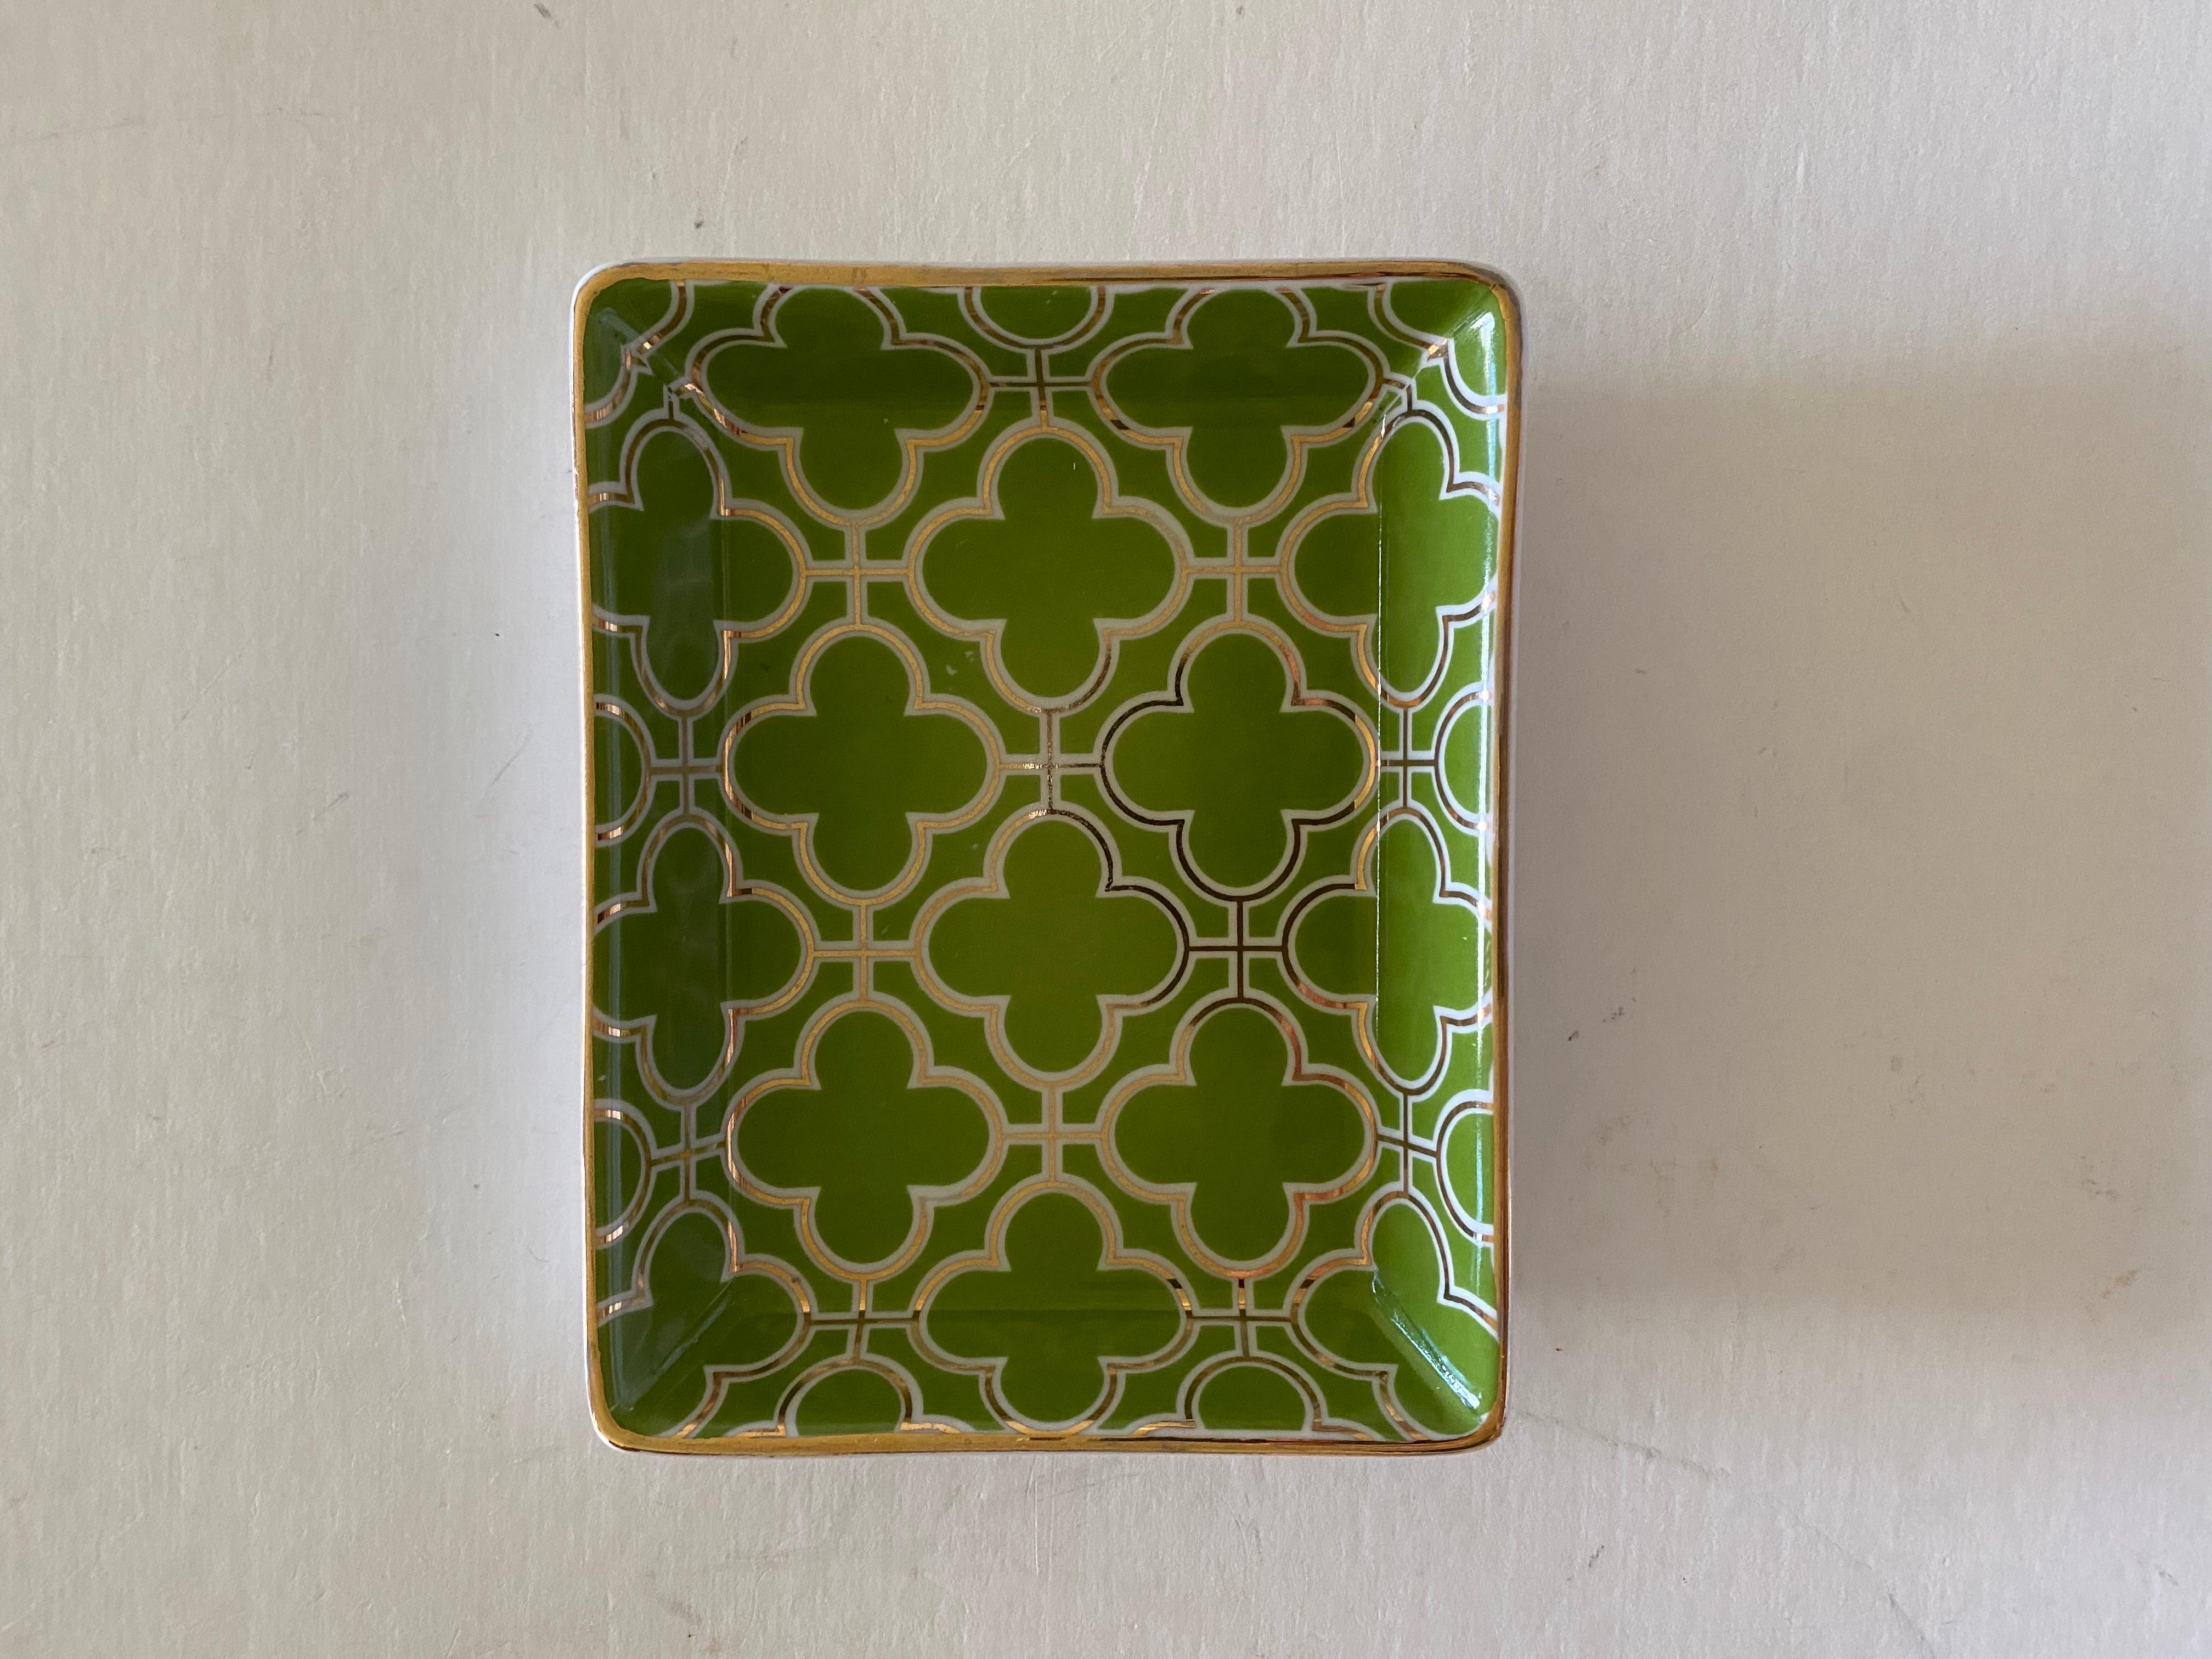 Godinger & Company ceramic dish in a Hollywood Regency style light green and white gometric design, accented by gold edge.

A versatile size that is ideal for use as a soap dish or key/jewelry tray.

Signed.

Very good condition: minimal